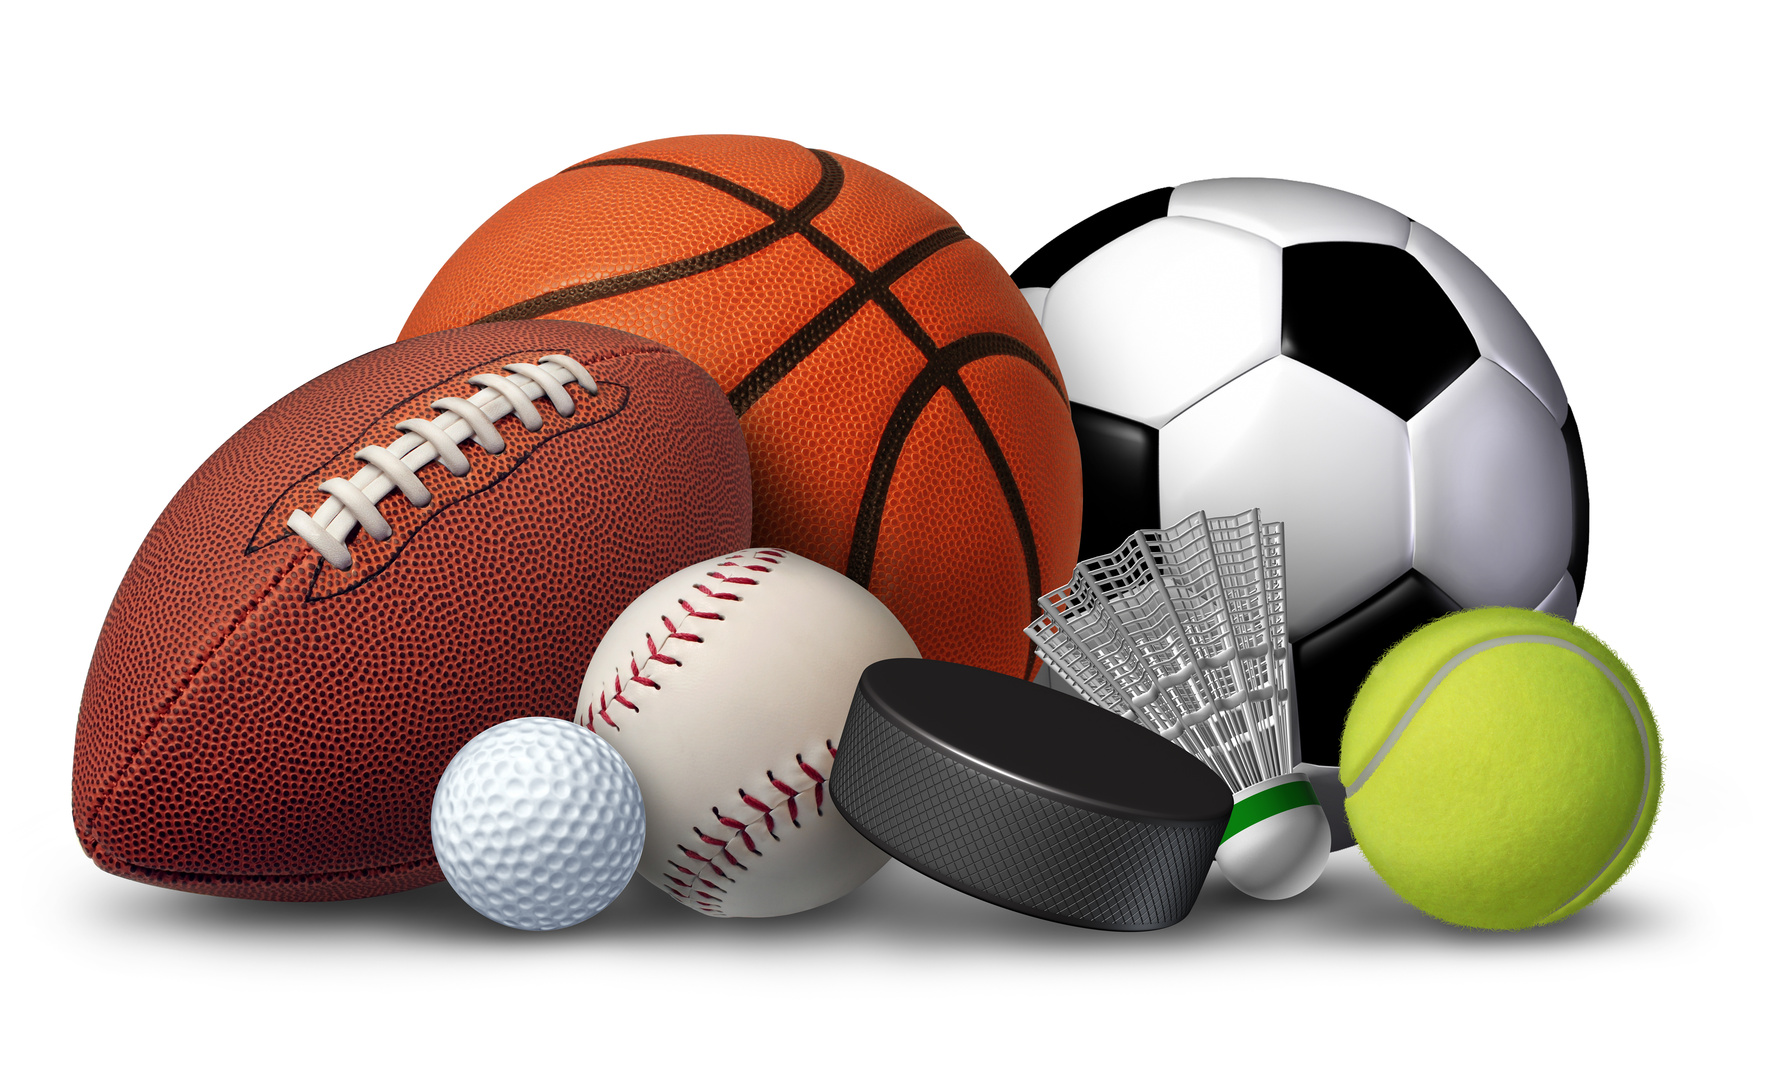 Sports equipment with a football basketball baseball soccer tennis and golf ball and badminton hockey puck as recreation and leisure fun activities for team and individual playing.